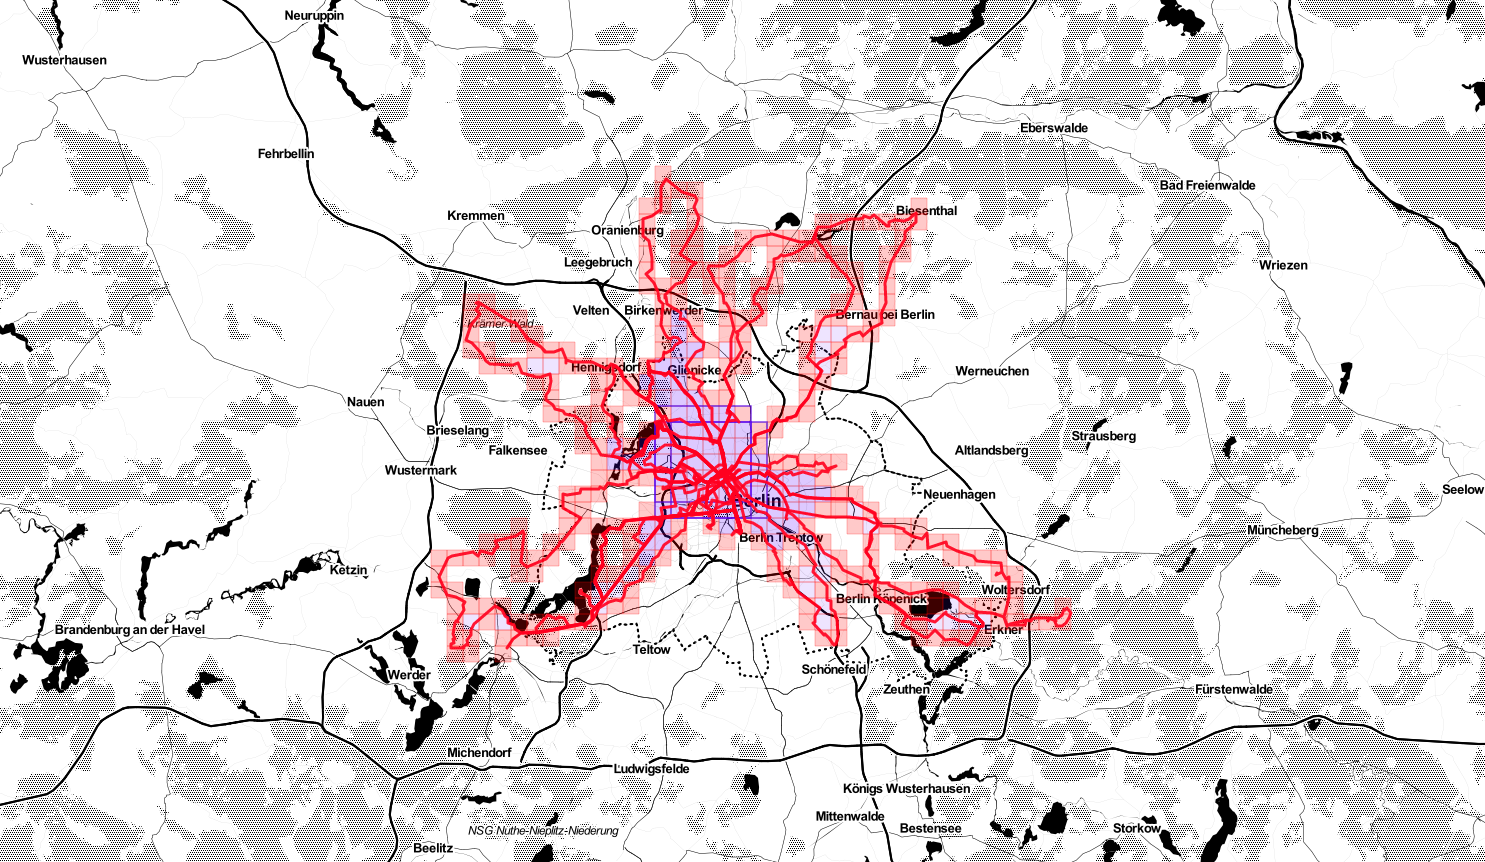 veloviewer-square-20200901.png